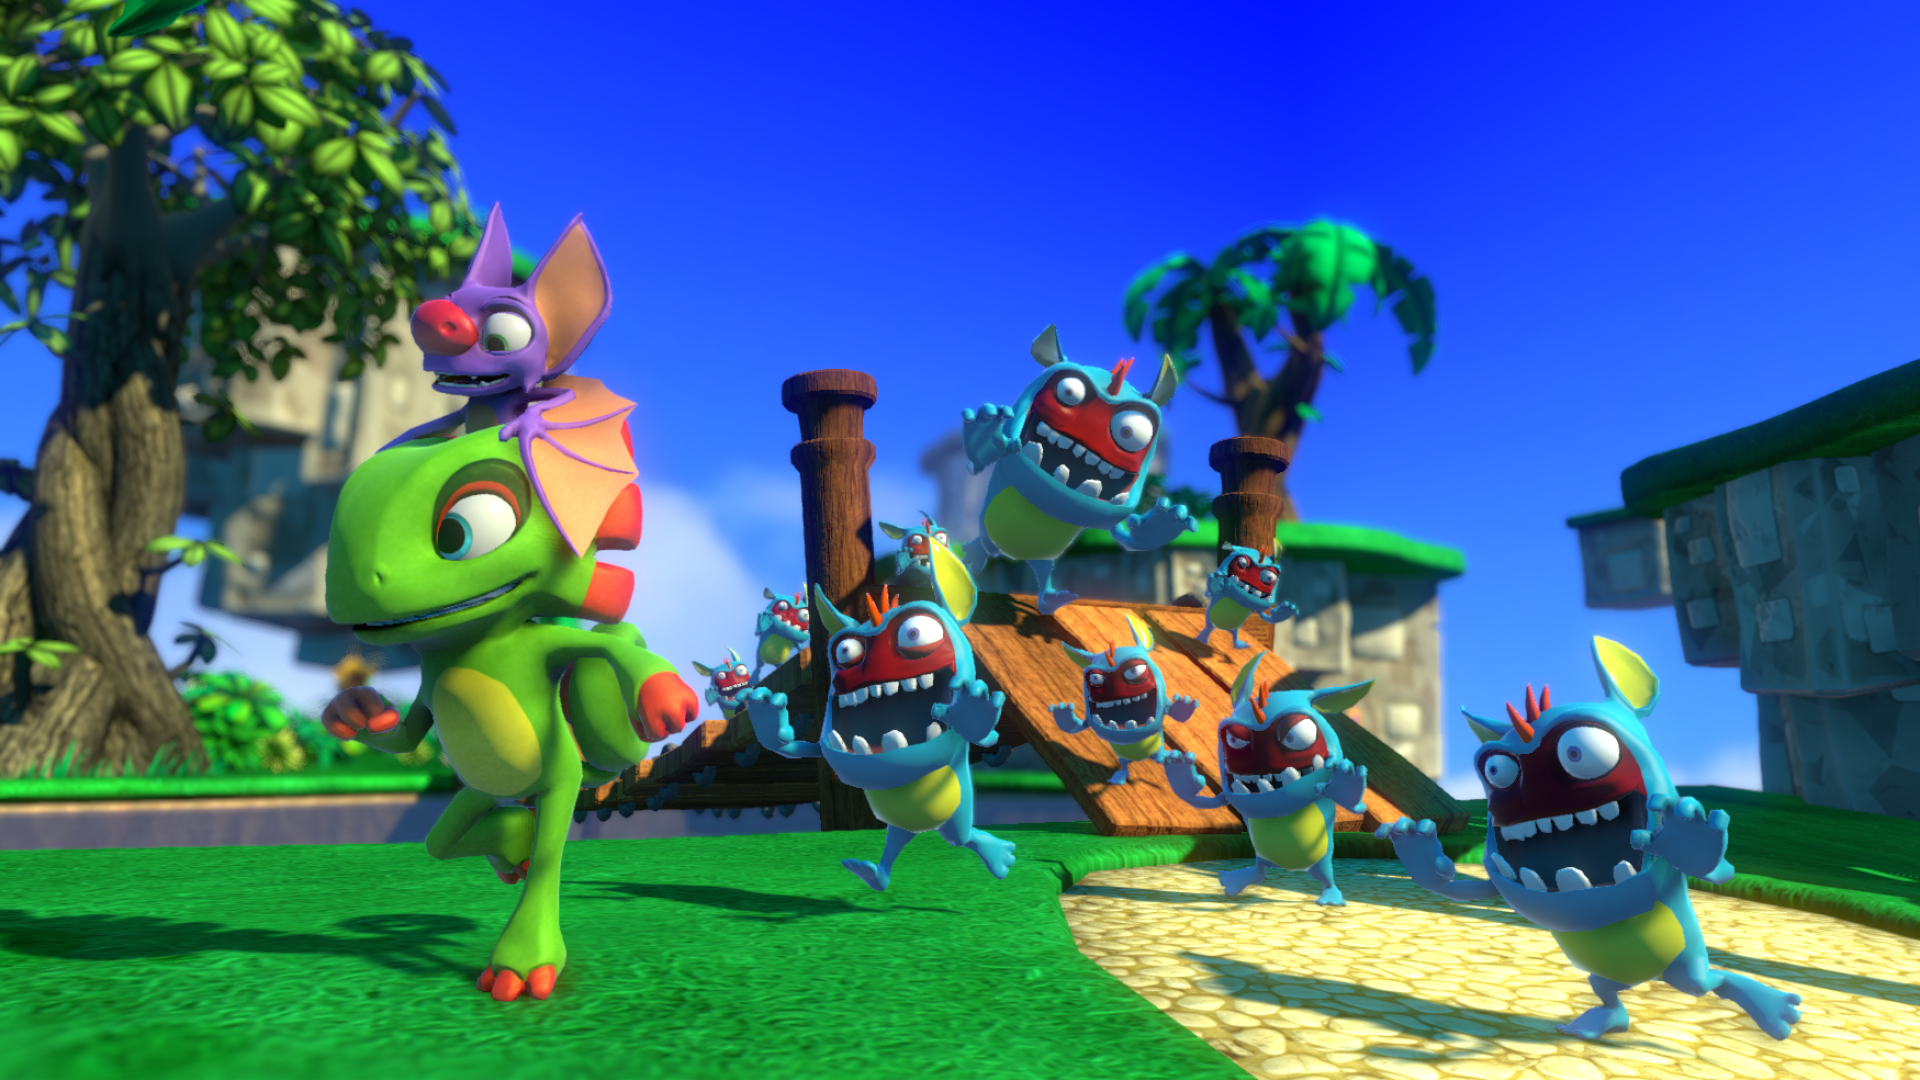 “Yooka-Laylee” Now Set for 2017 Release - Also Has Silly Jab at 